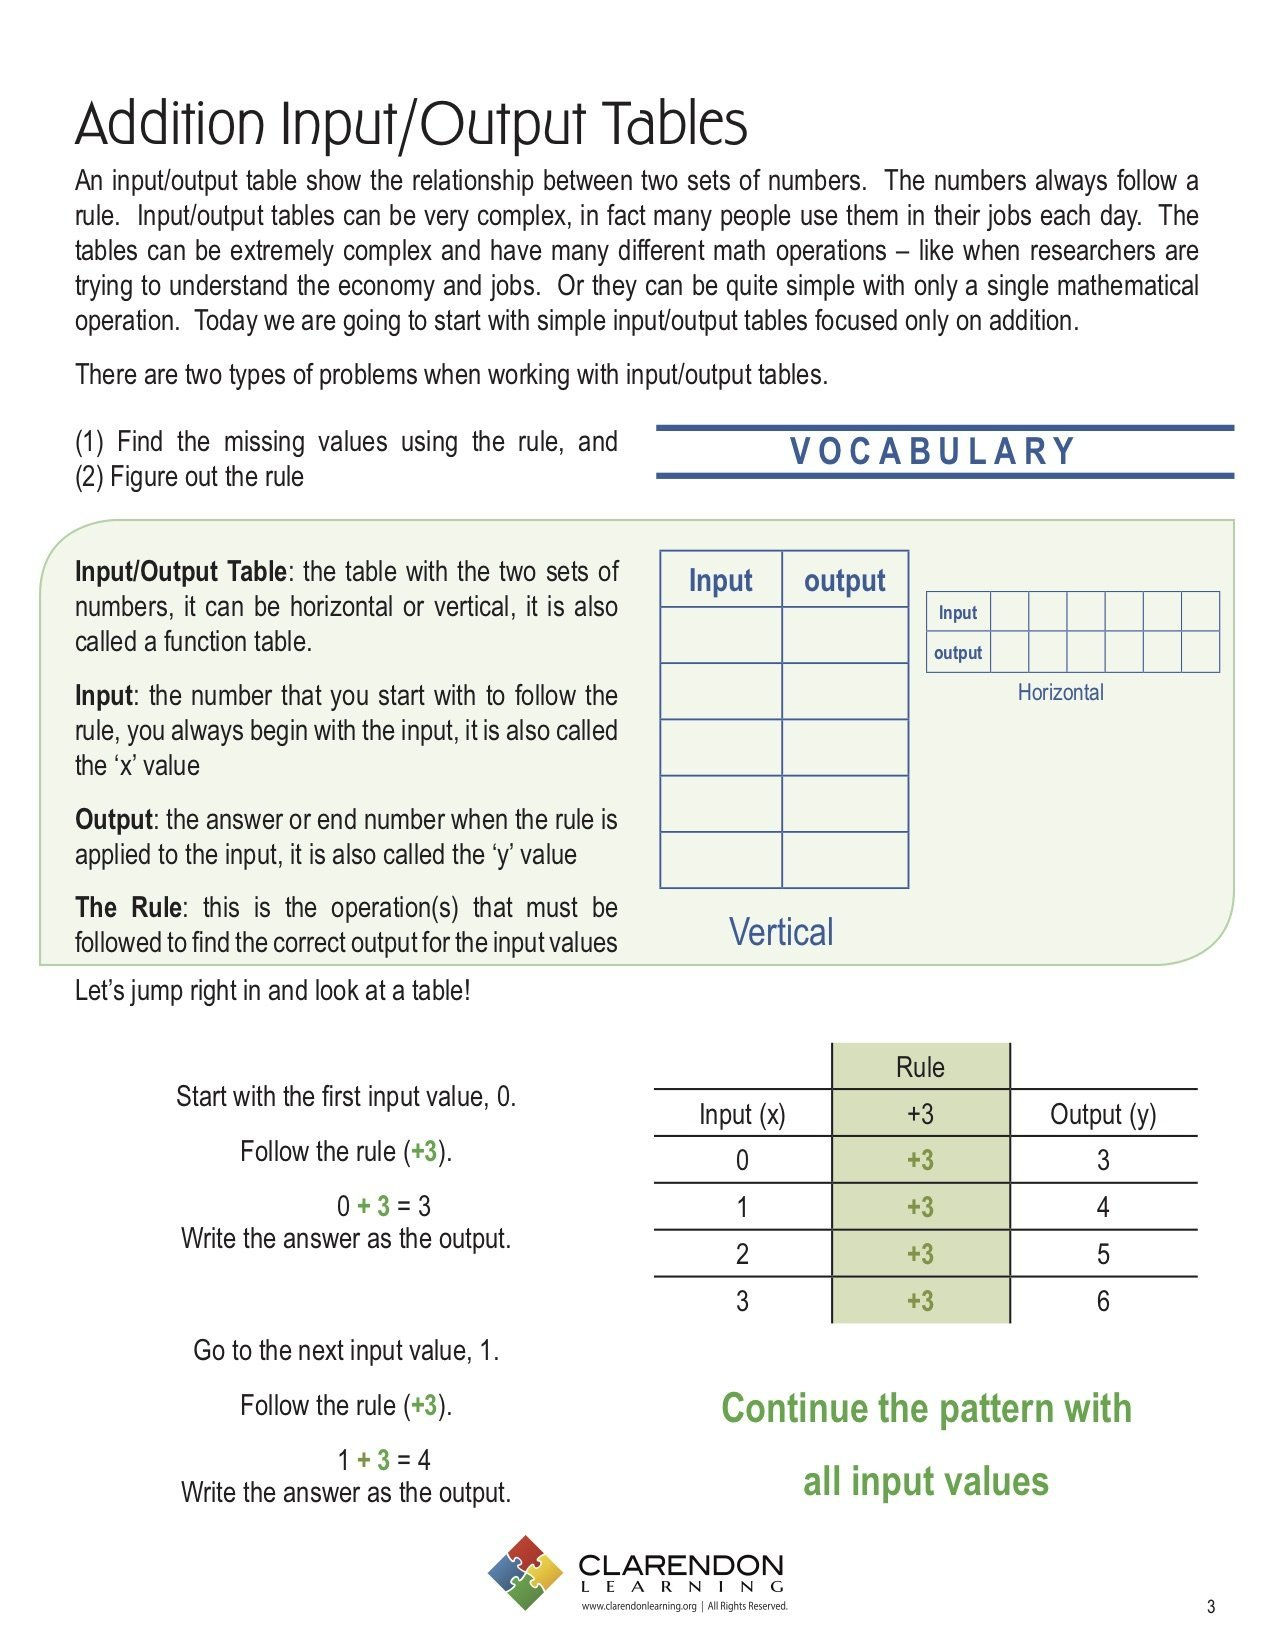 Addition Inputoutput Tables Lesson Plan  Clarendon Learning As Well As Input Output Tables Worksheet